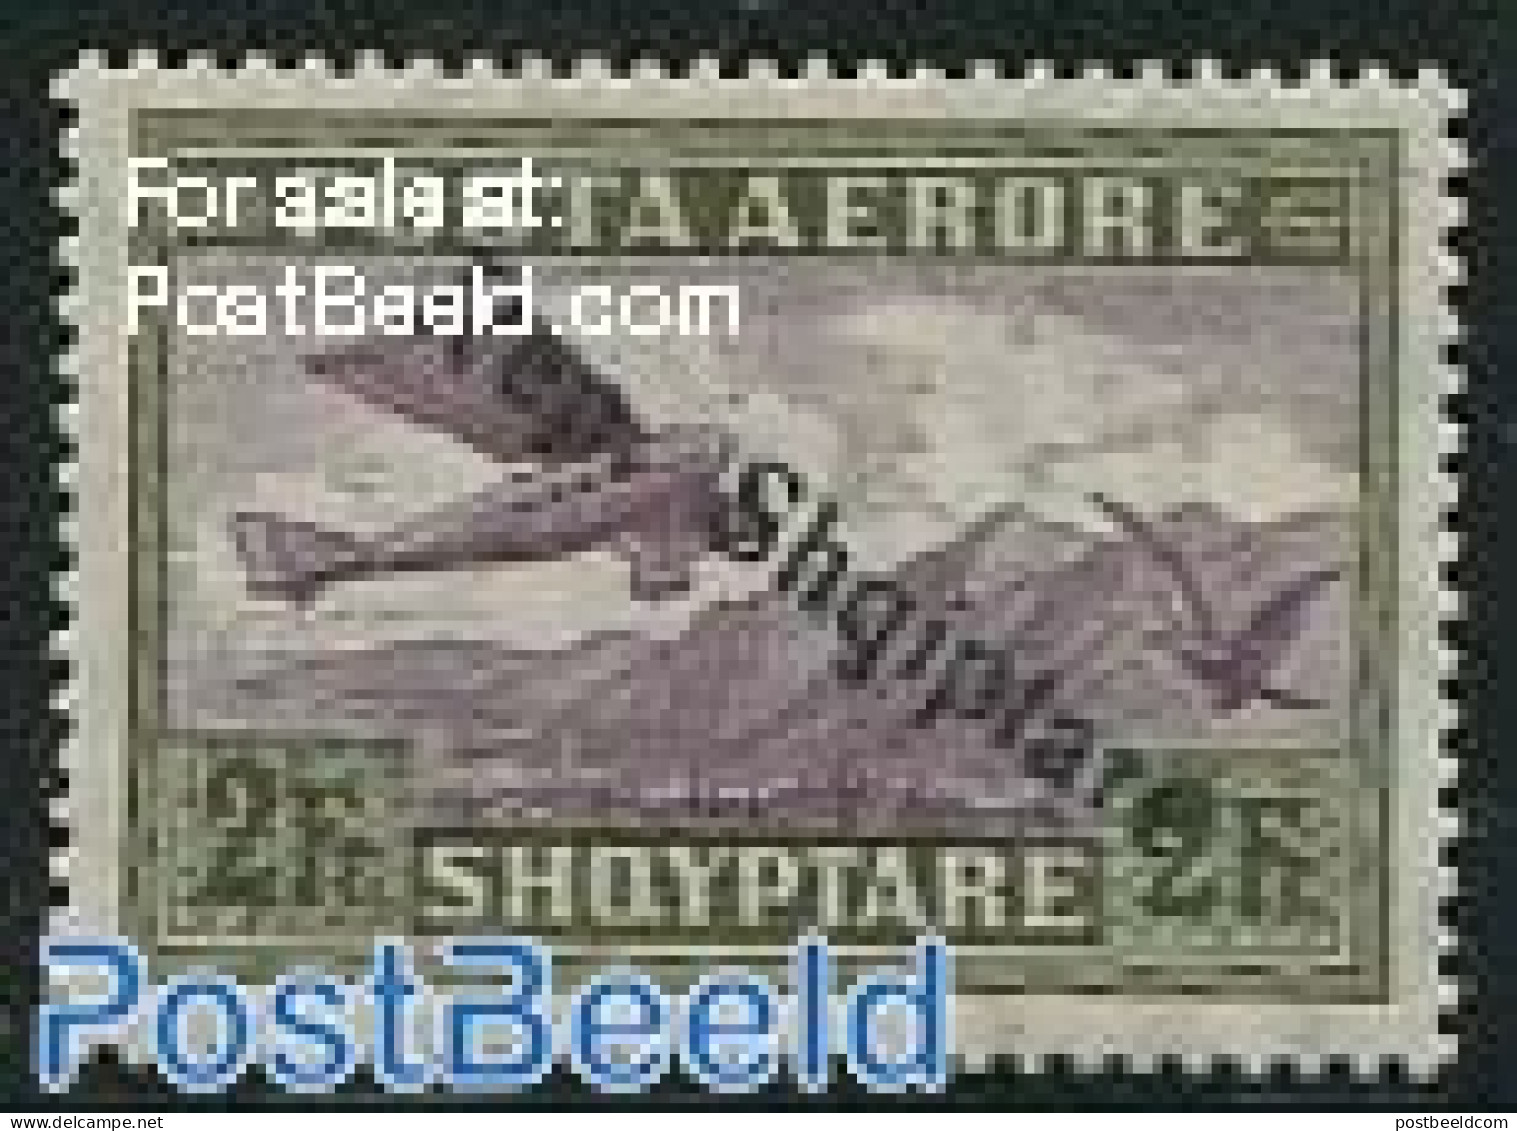 Albania 1927 2Fr, Stamp Out Of Set, Unused (hinged), Nature - Transport - Birds - Aircraft & Aviation - Airplanes